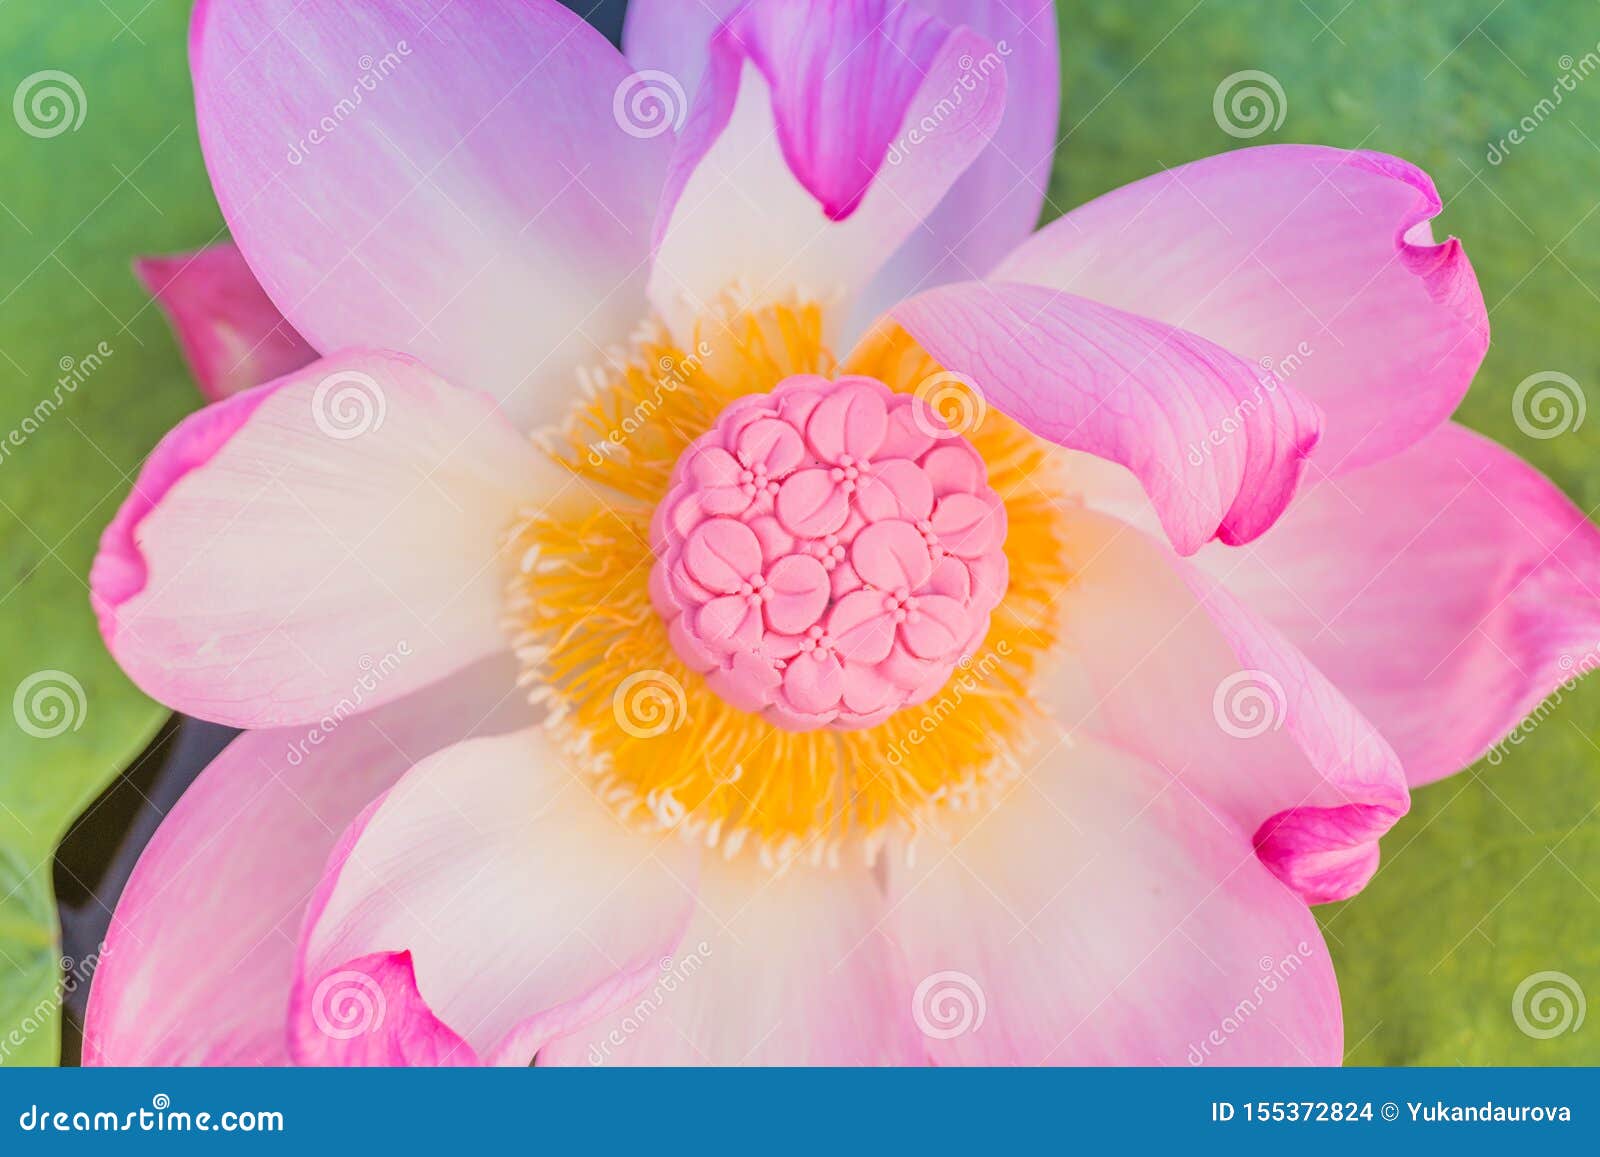 Pink Mooncake In A Fresh Pink Lotus Flower On A Green